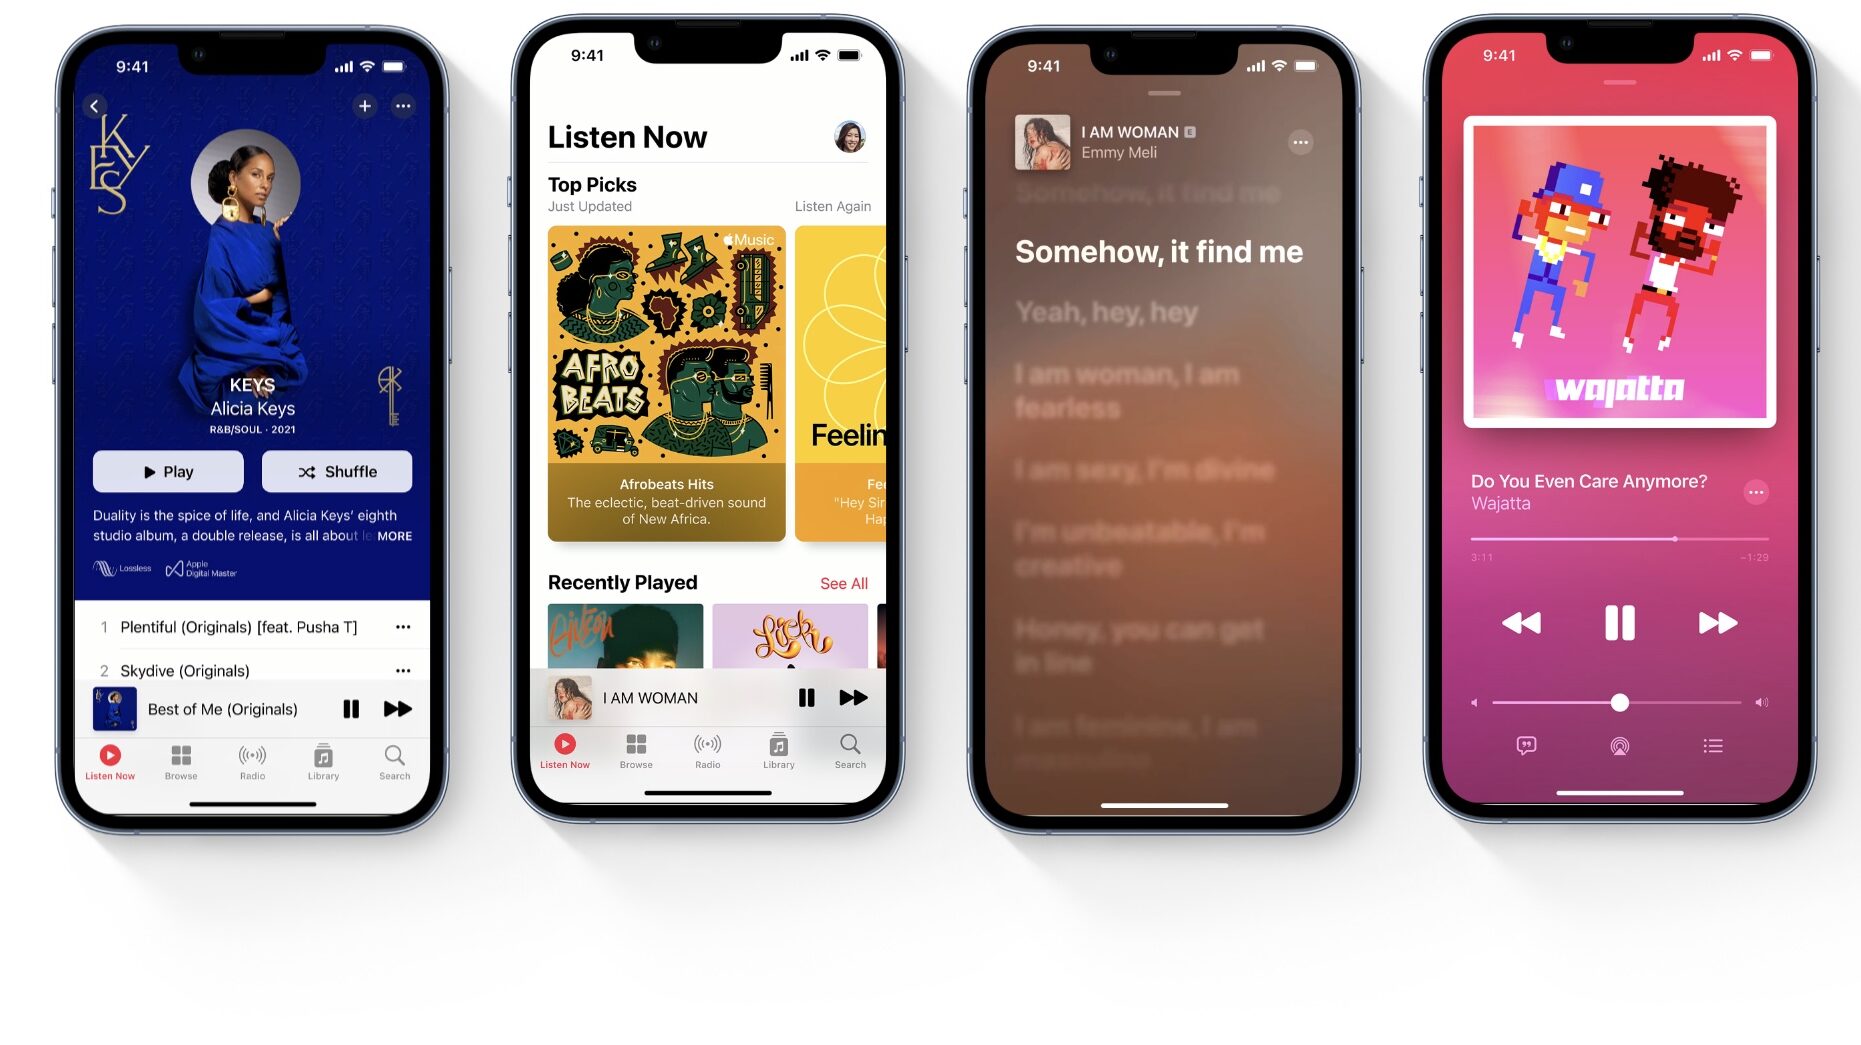 Apple Music just raised its subscription price to $10.99 in the US. Will Spotify be next? – Music Business Worldwide